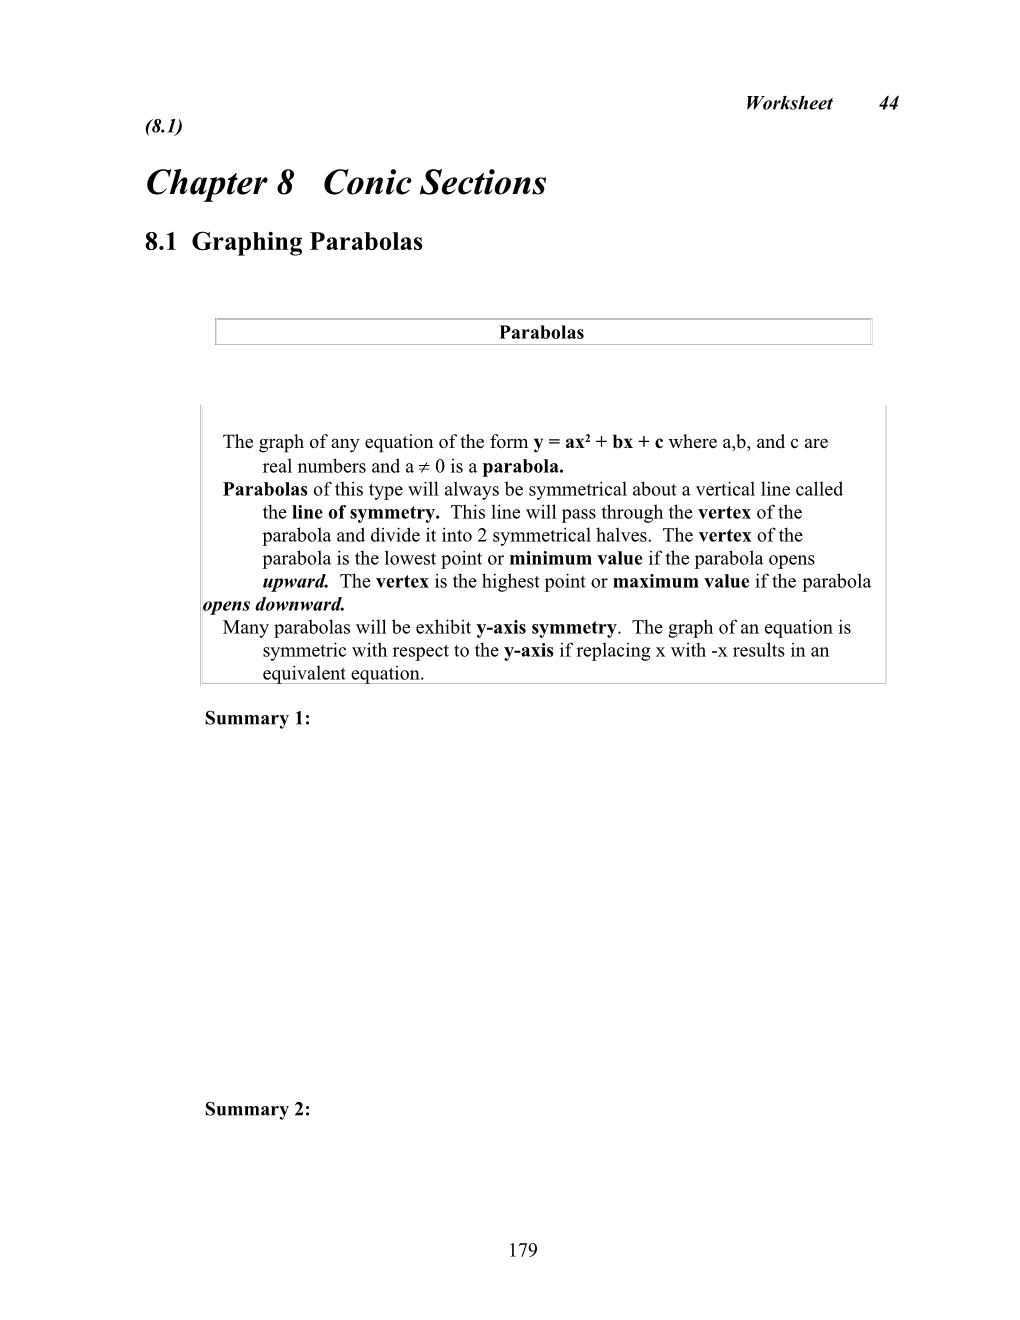 Chapter 8 Conic Sections